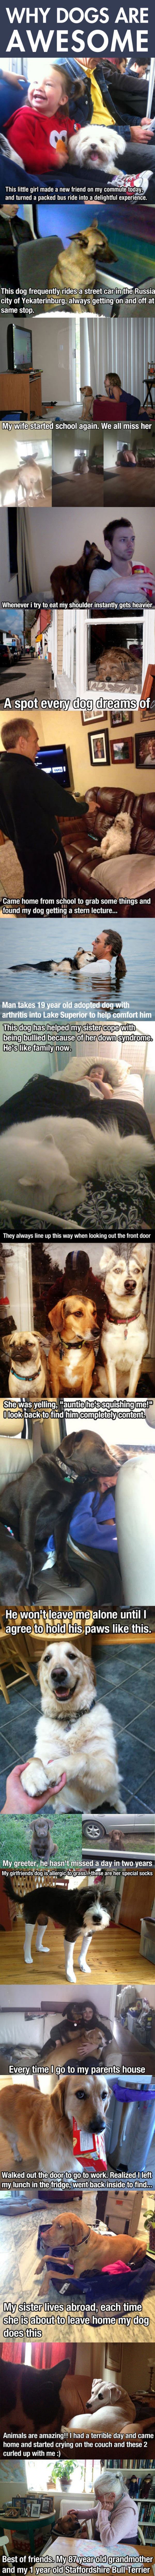 why_dogs_are_awesome.jpg